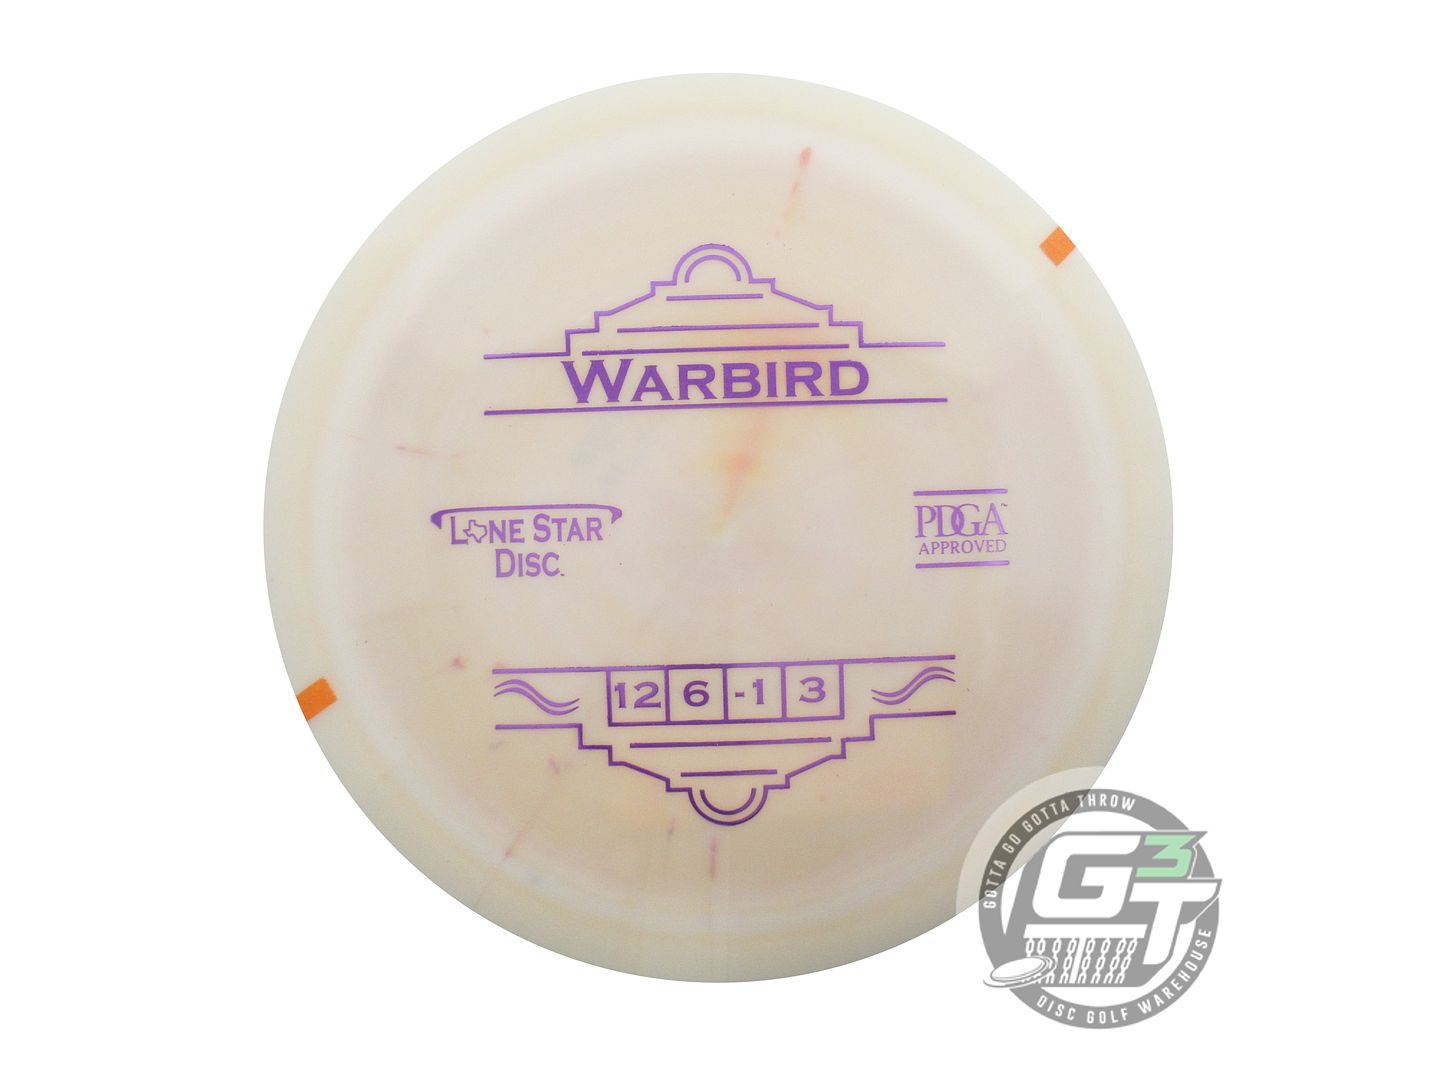 Lone Star Alpha Warbird Distance Driver Golf Disc (Individually Listed)